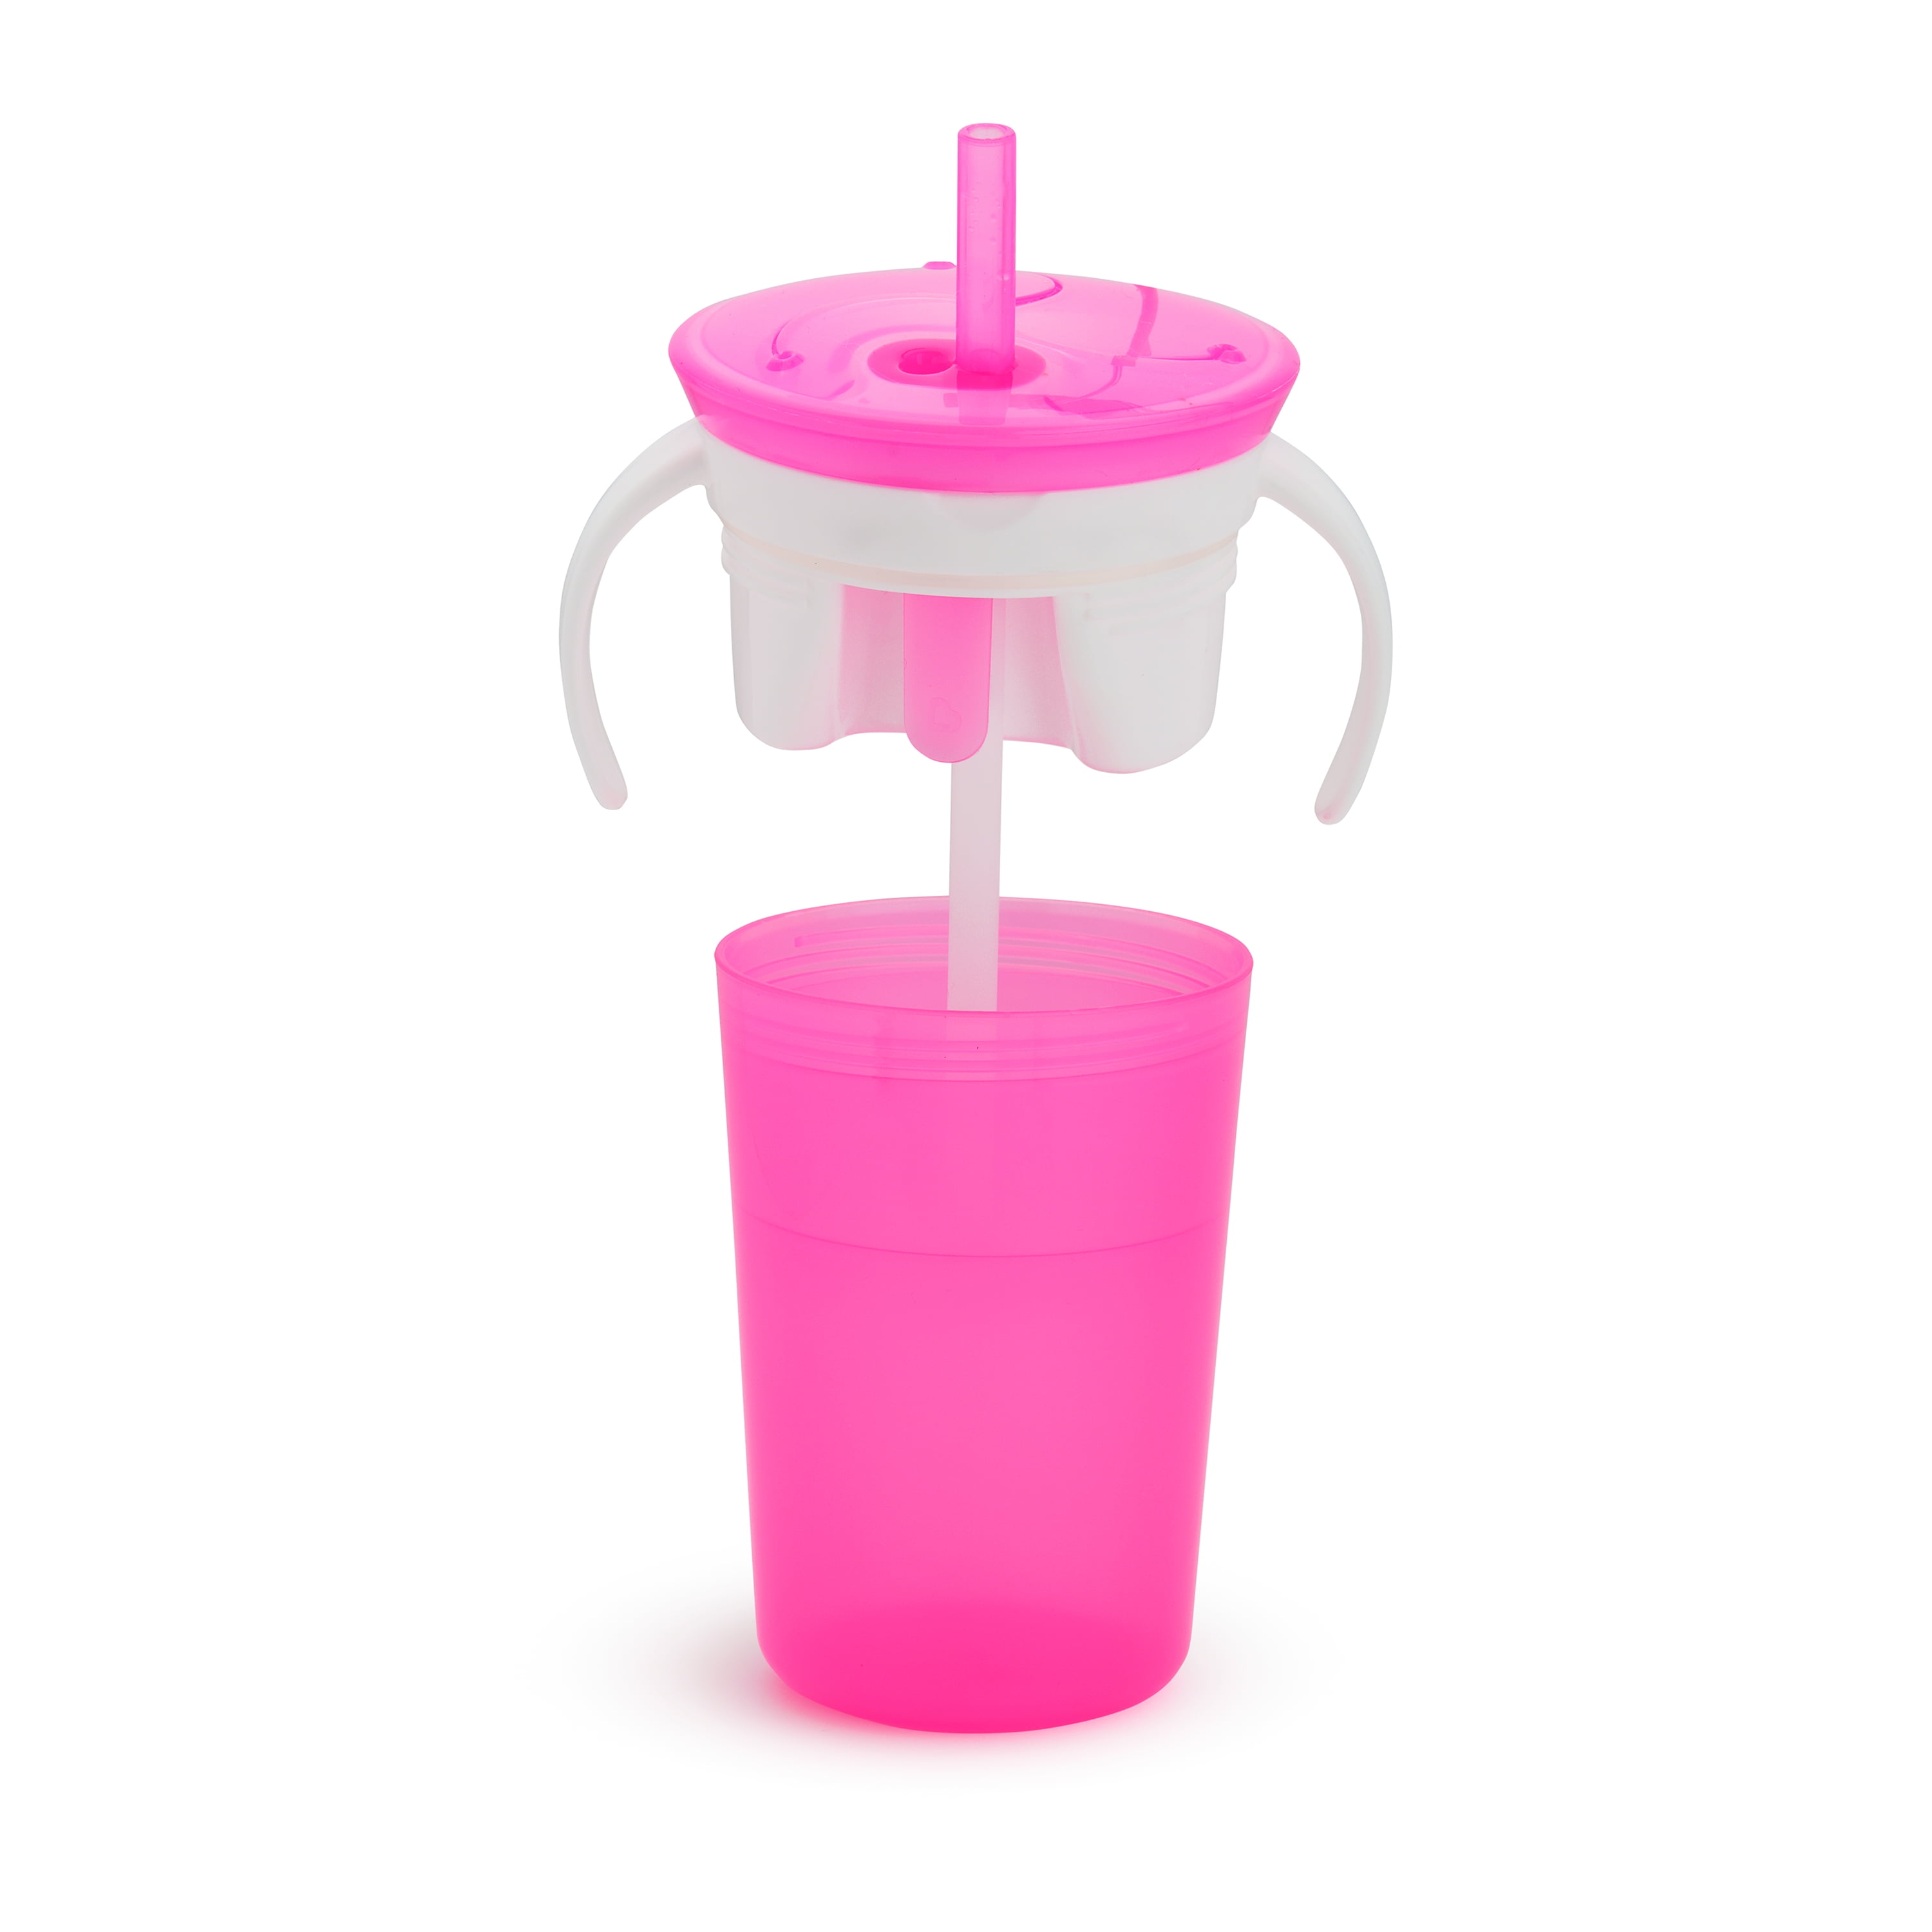 Munchkin SnackCatch & Sip 2-in-1 Snack Catcher and Cup, Pink